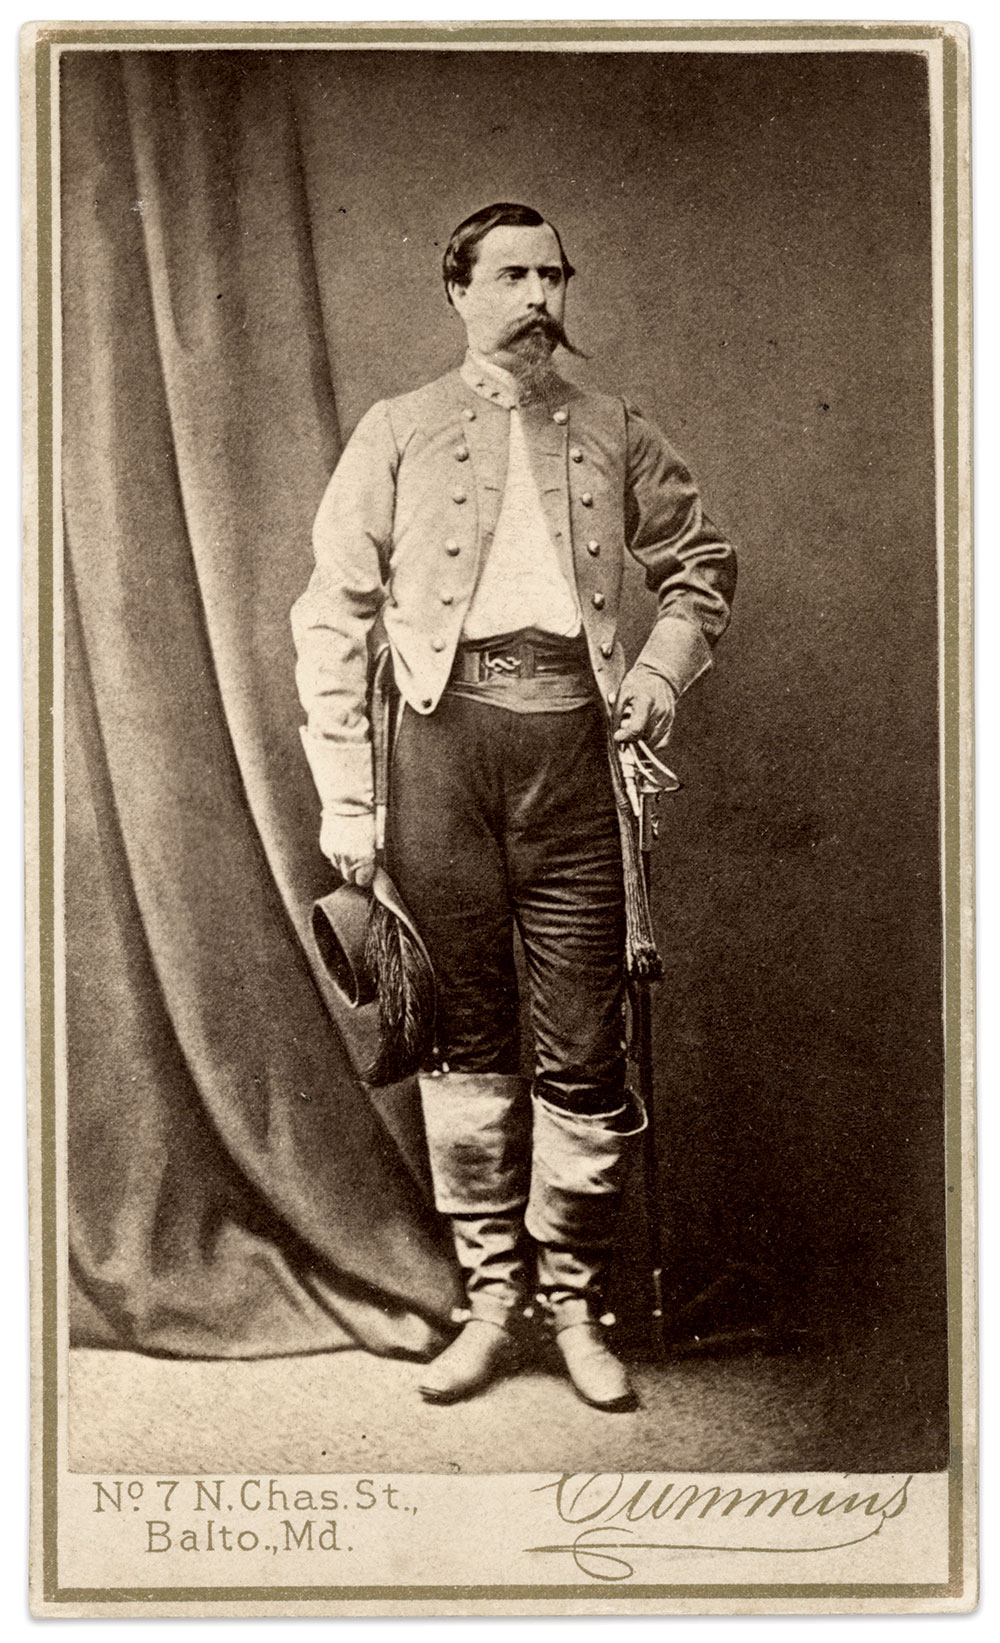 Carte de visite dated August 1884 by James S. Cummins of Baltimore, Md.